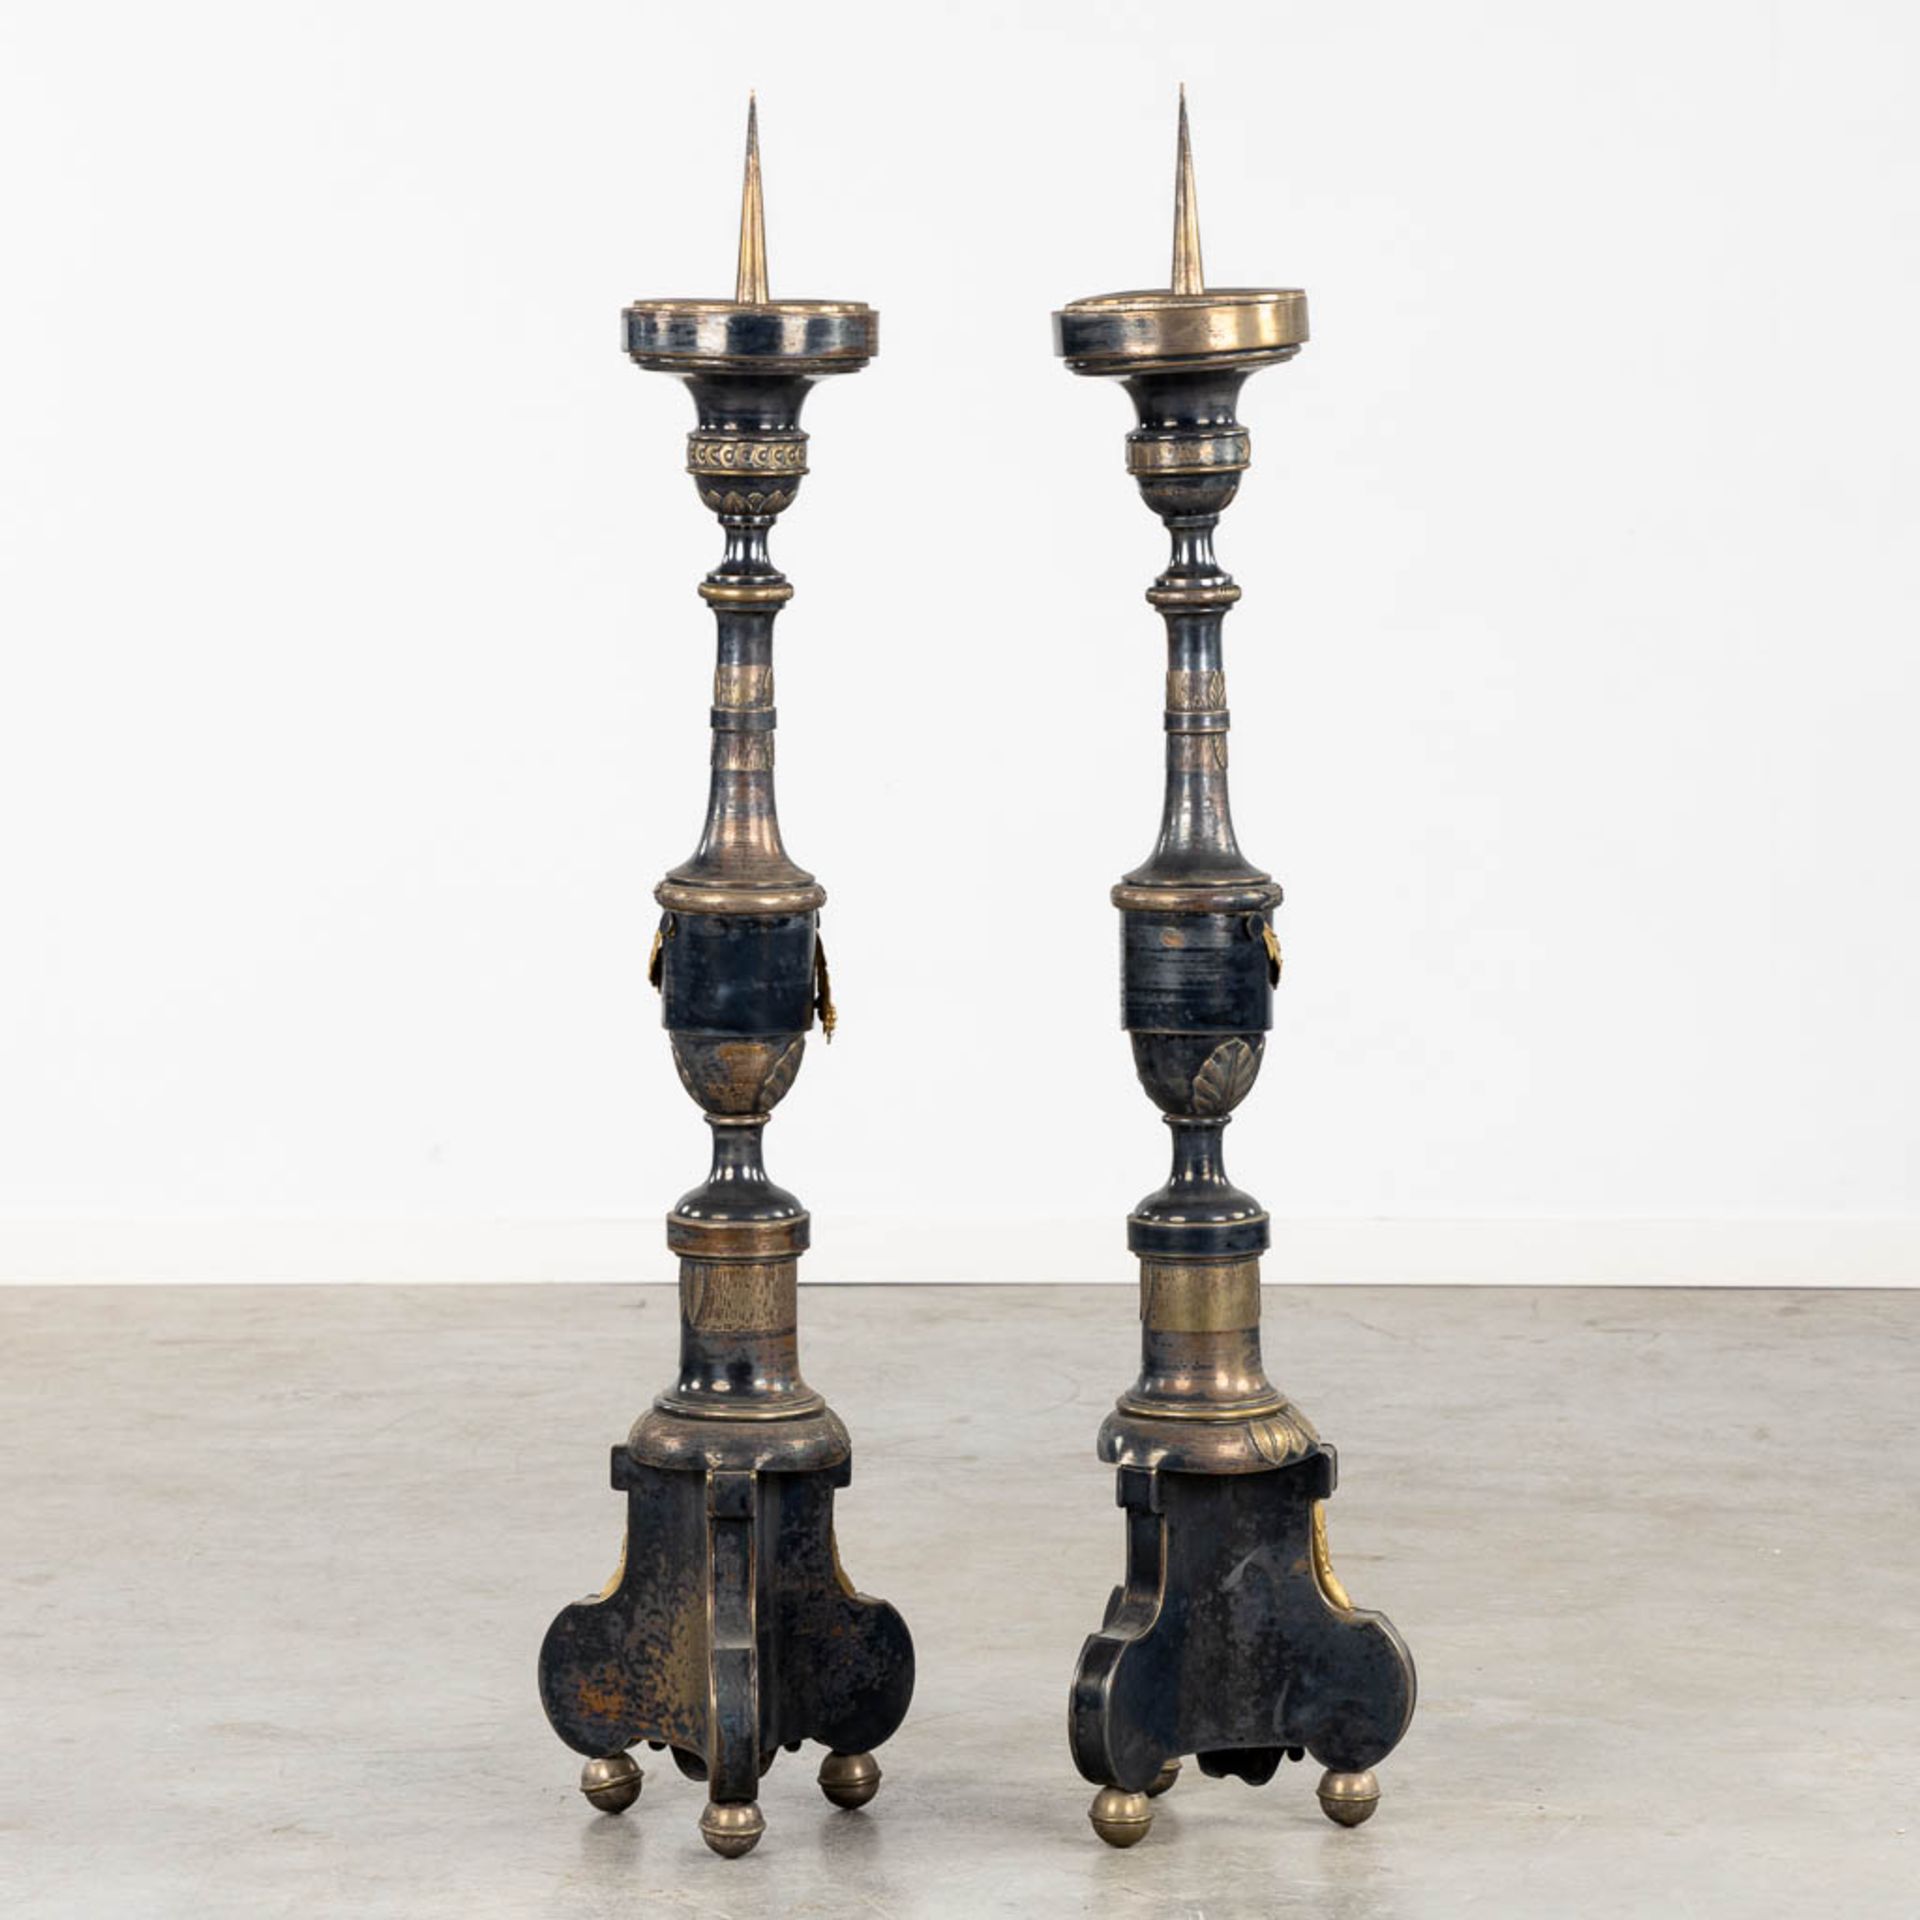 A pair of Church Candlesticks, silver- and gold-plated metal. 19th C. (H:120 cm) - Bild 4 aus 9